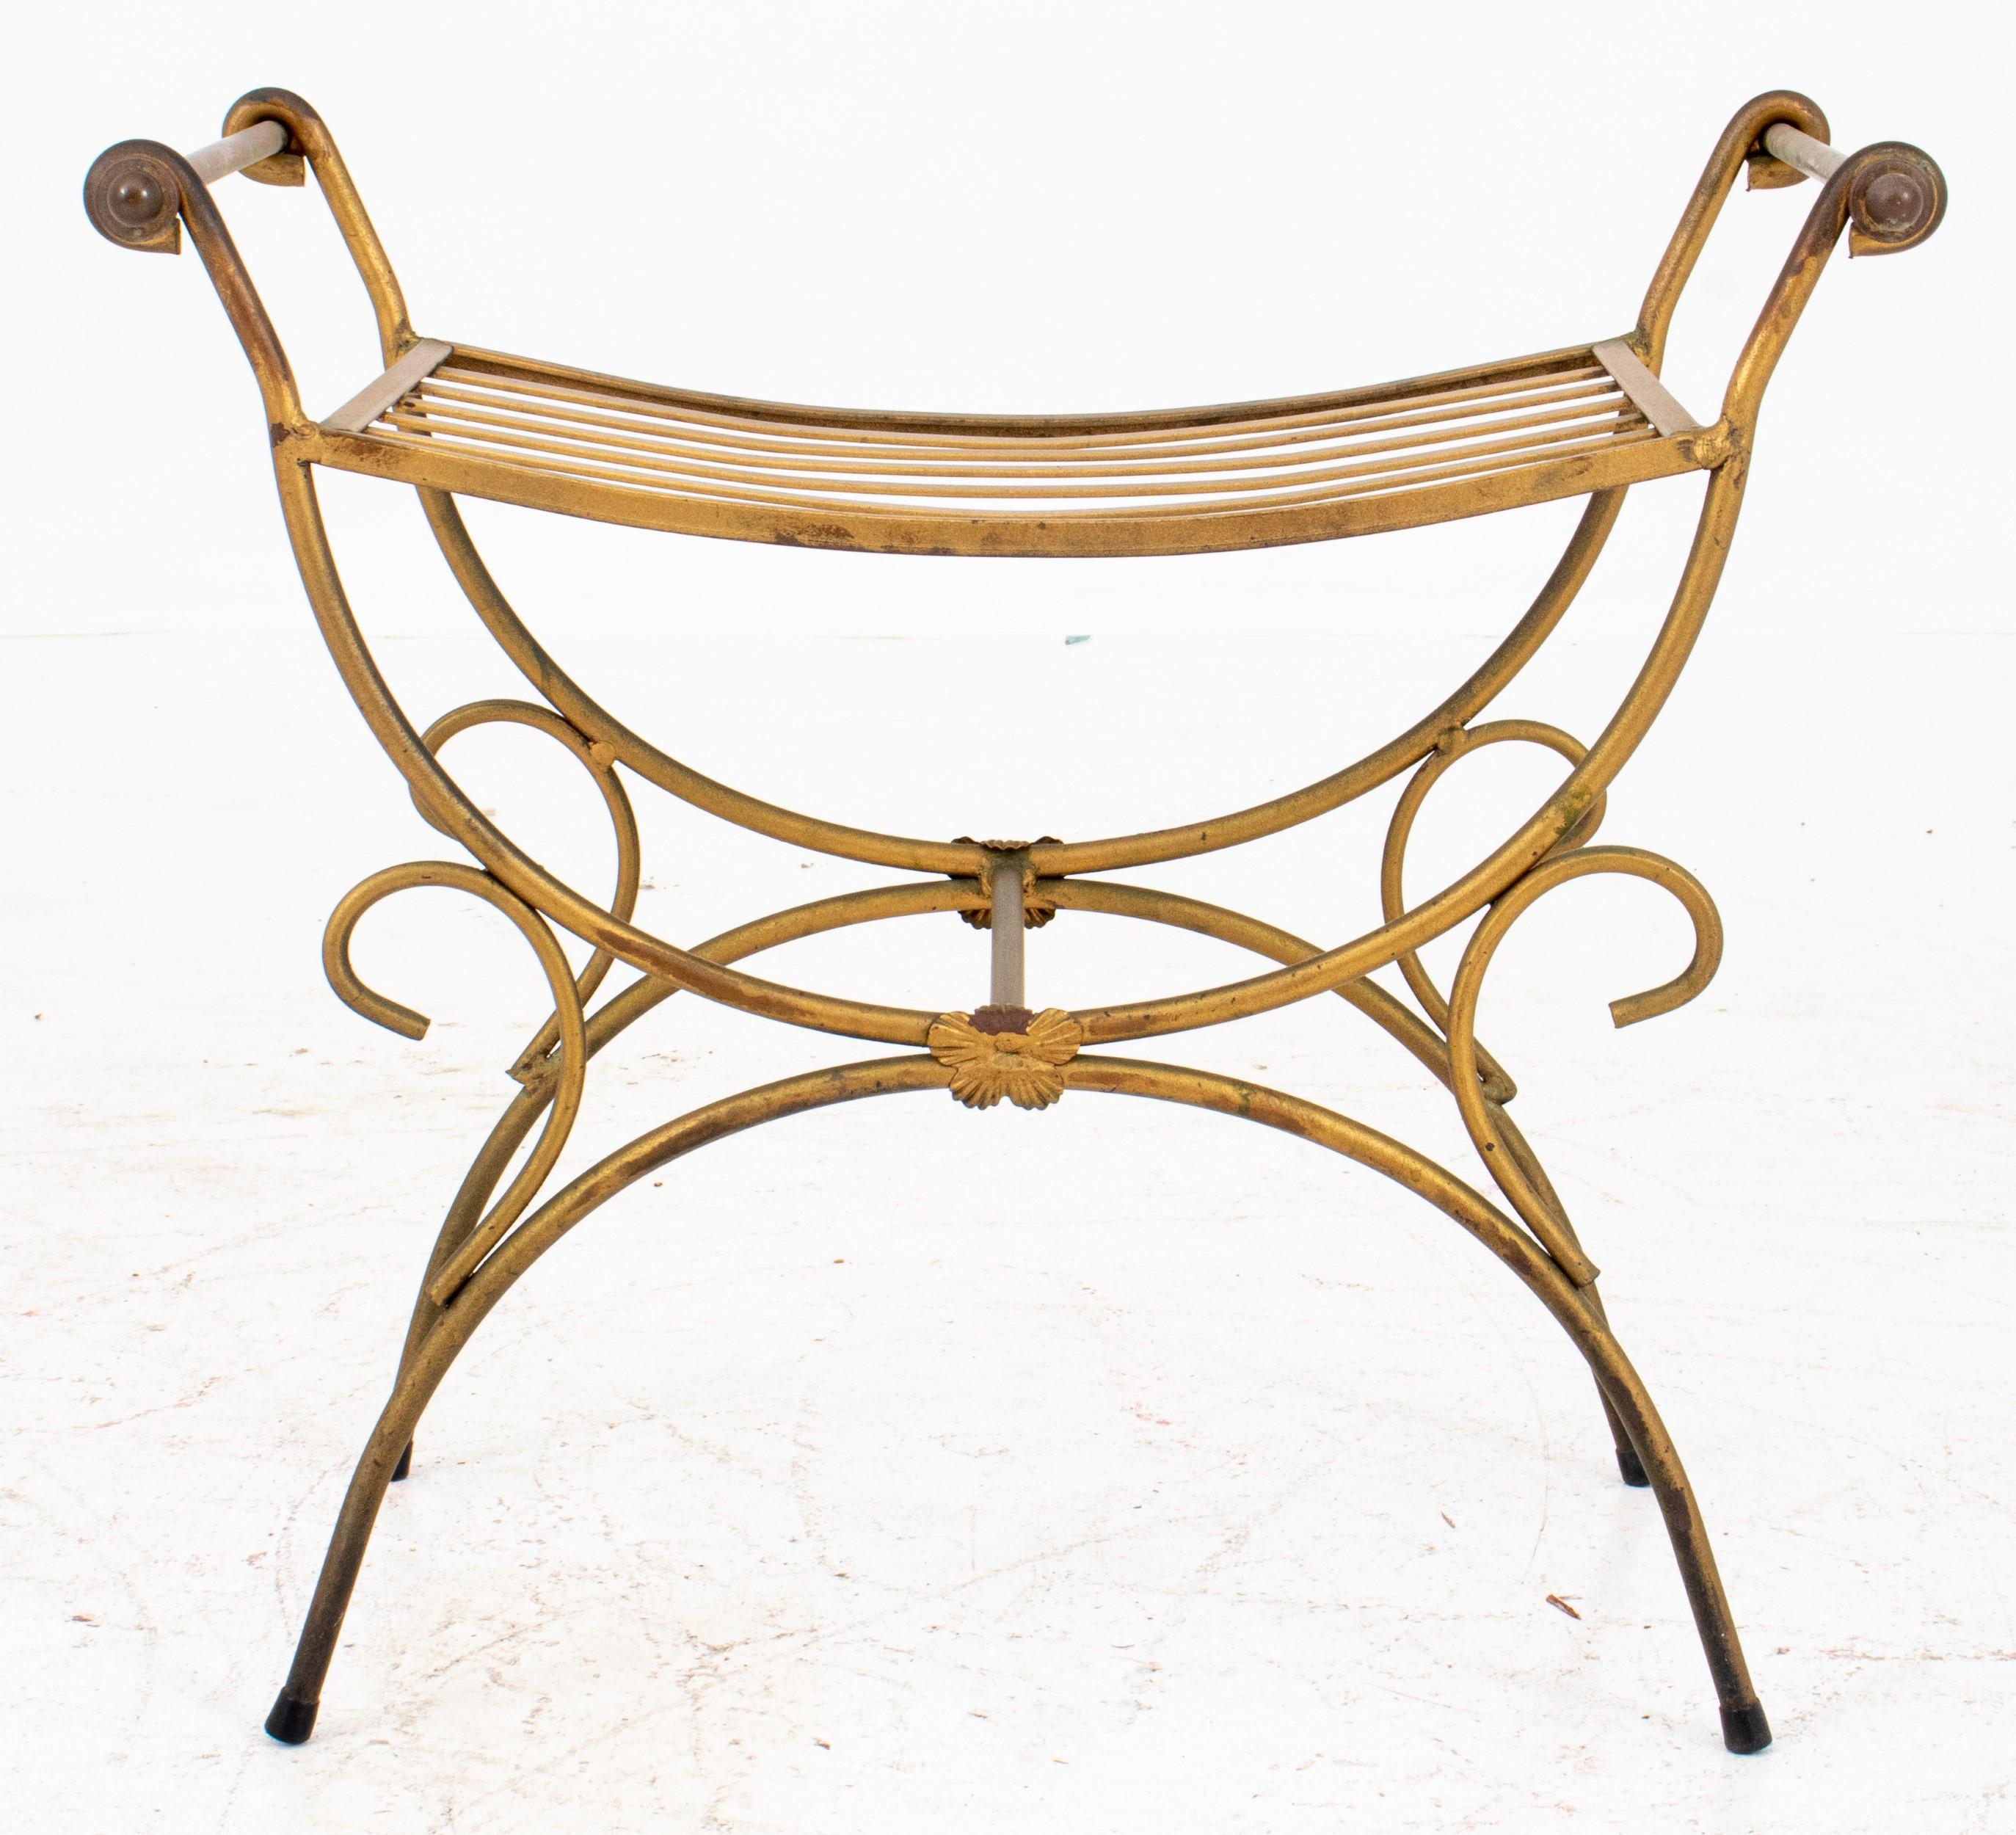 Empire manner giltmetal curule bench. Here's a breakdown of its key features:

Style: Empire manner - This refers to a design style inspired by the neoclassical aesthetic of the French Empire period (early 19th century).

Material: Giltmetal - This